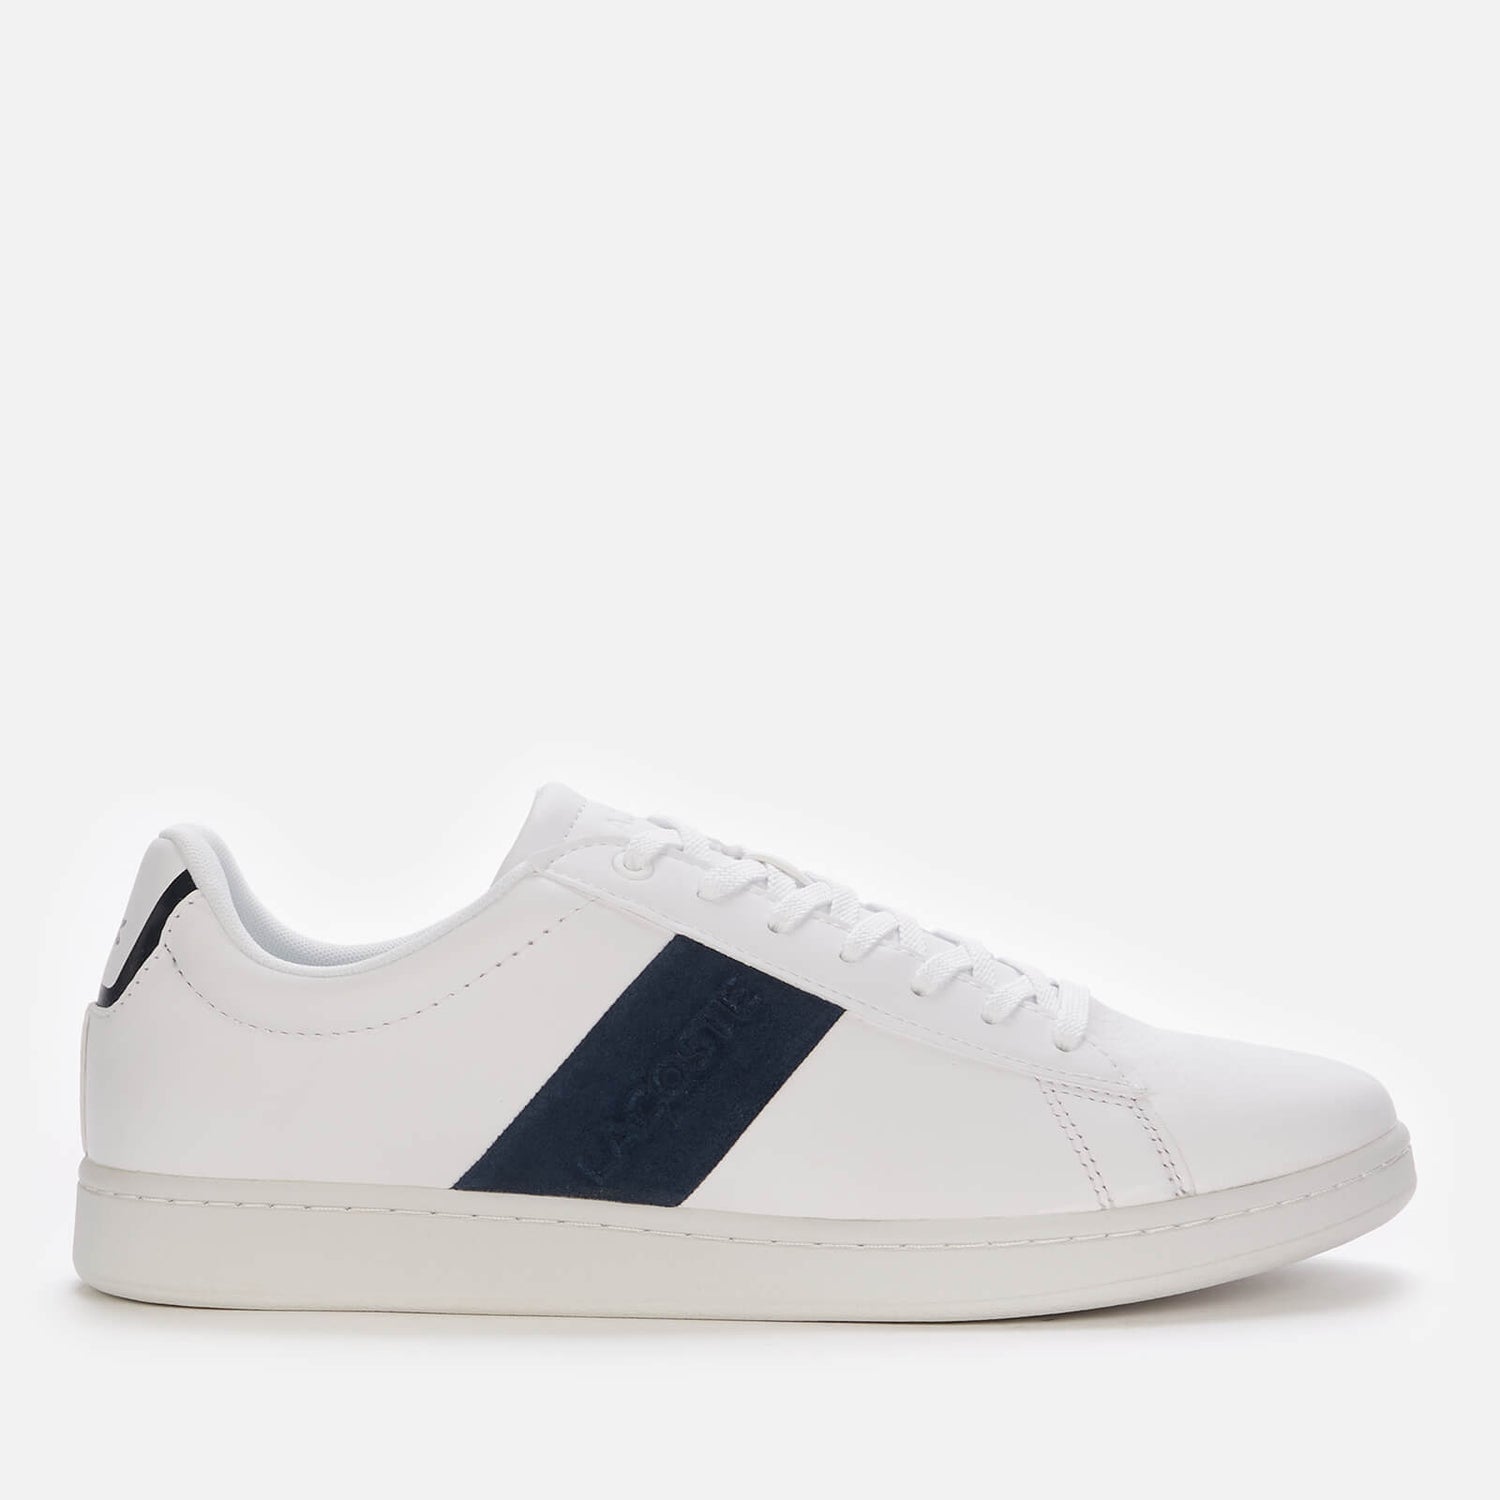 Lacoste Men's Carnaby Evo 0120 3 Leather Cupsole Trainers - White/Navy